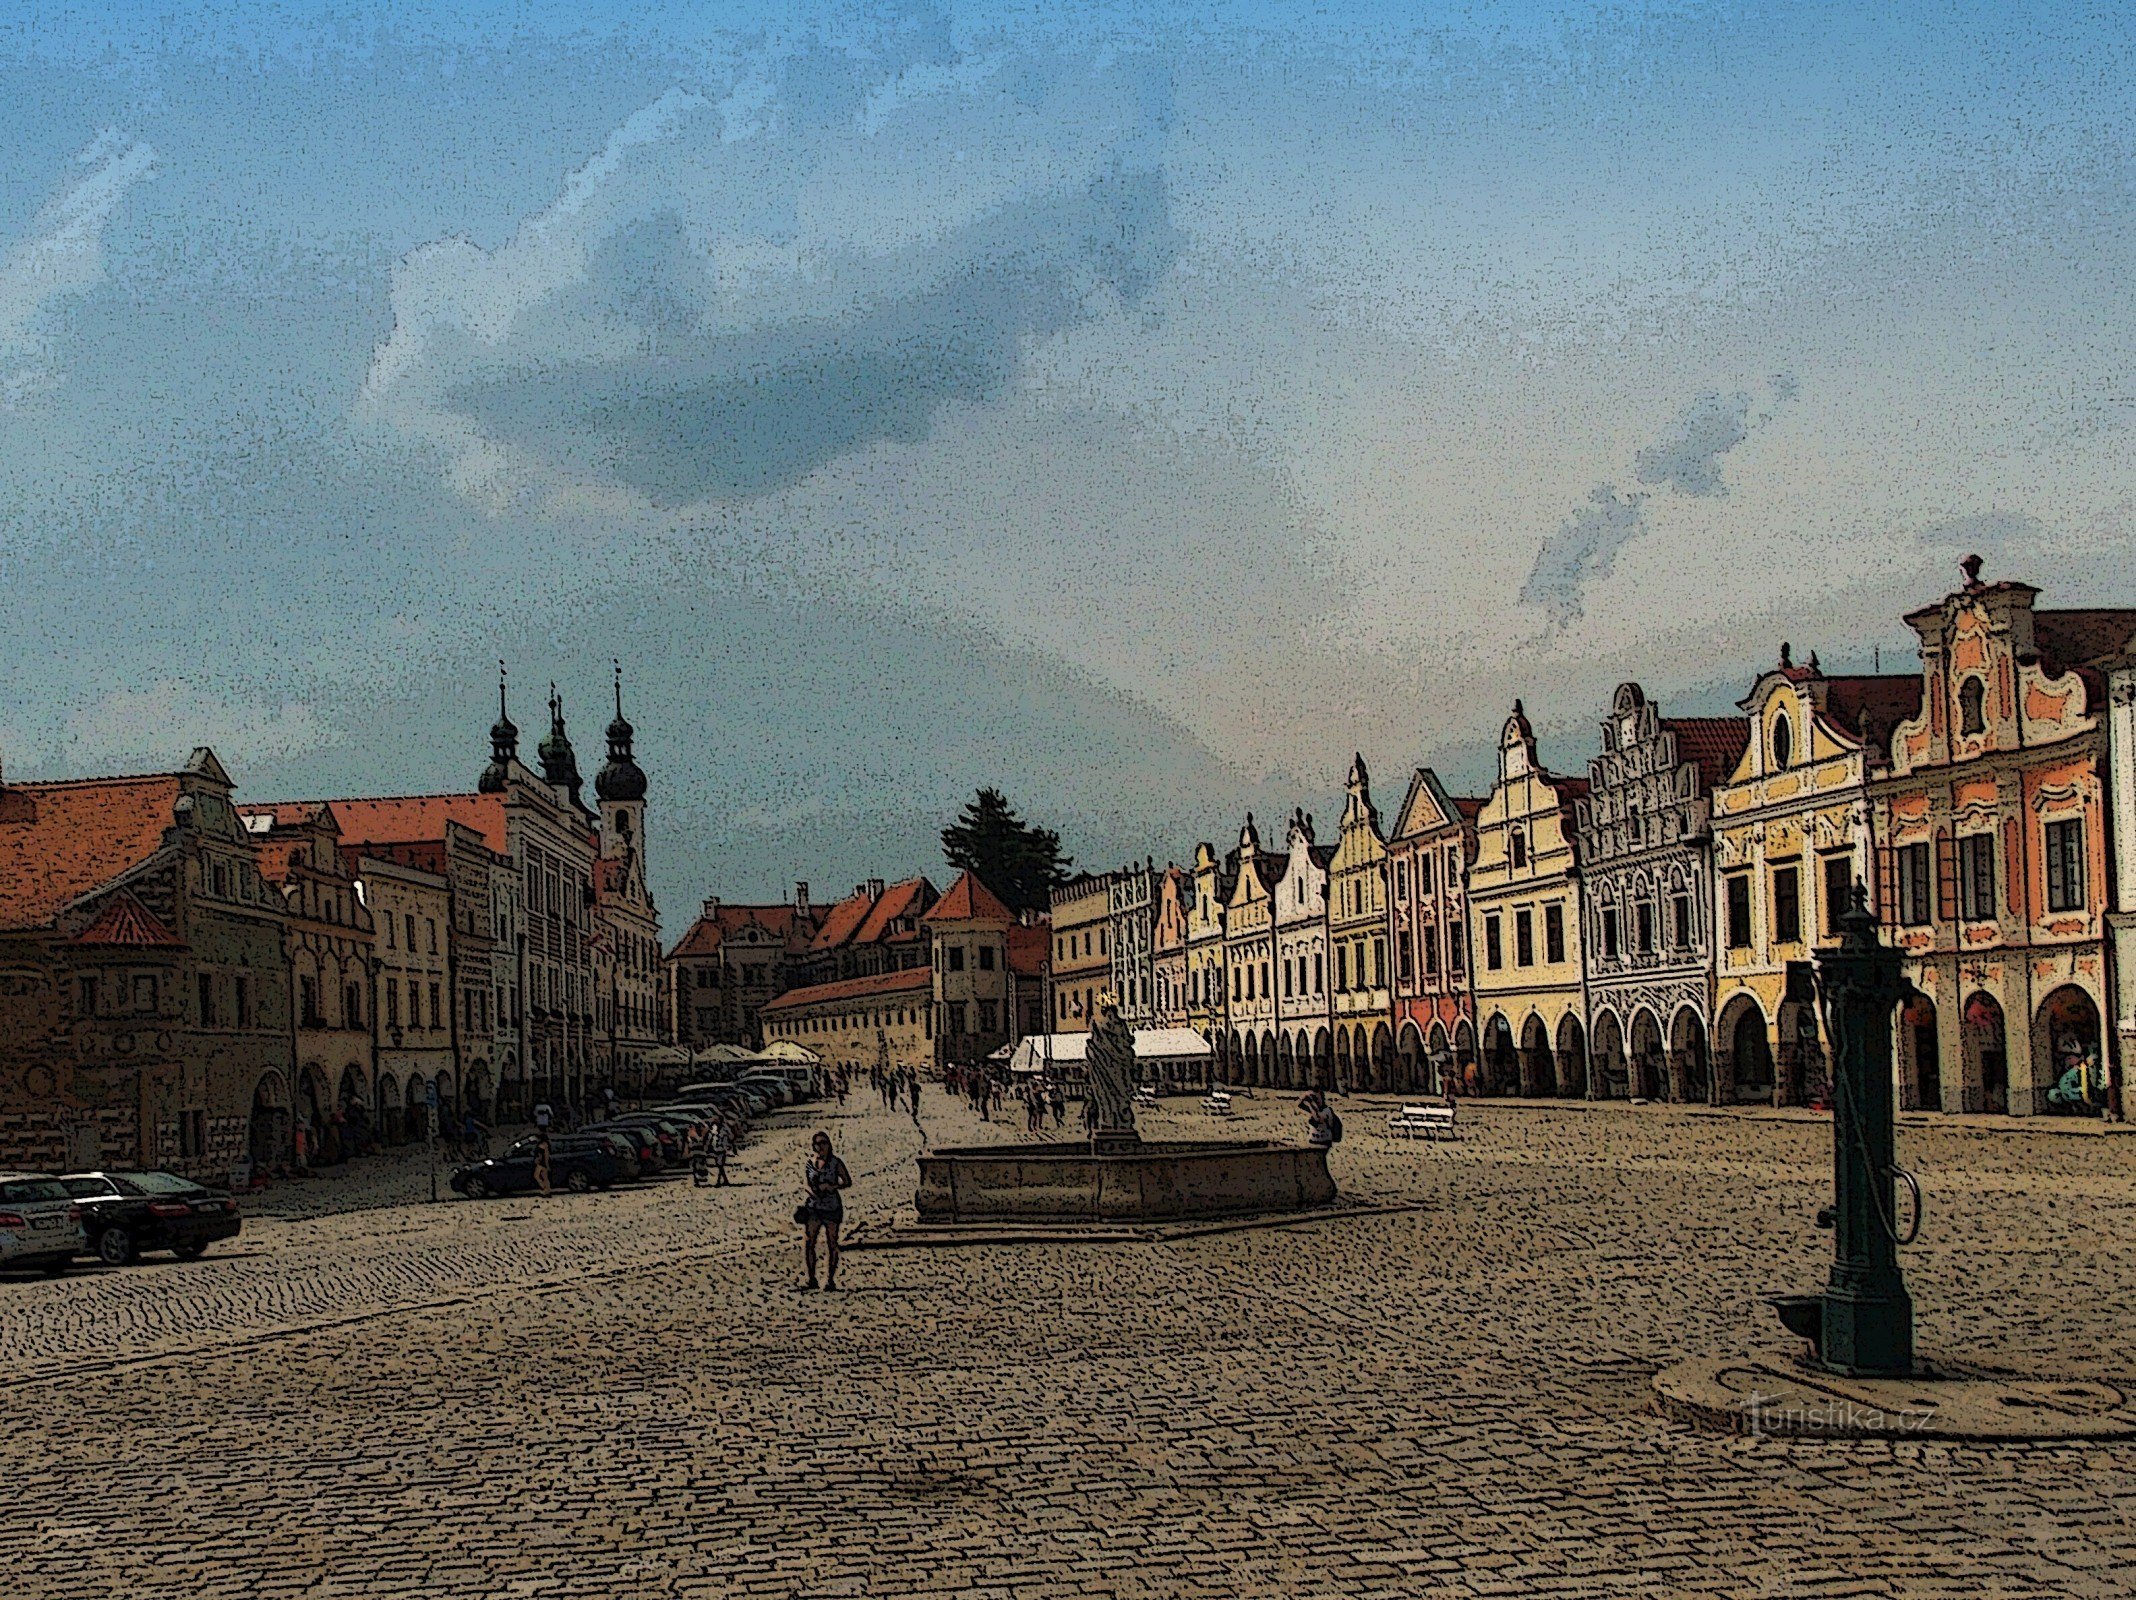 A point of interest on the Telč square